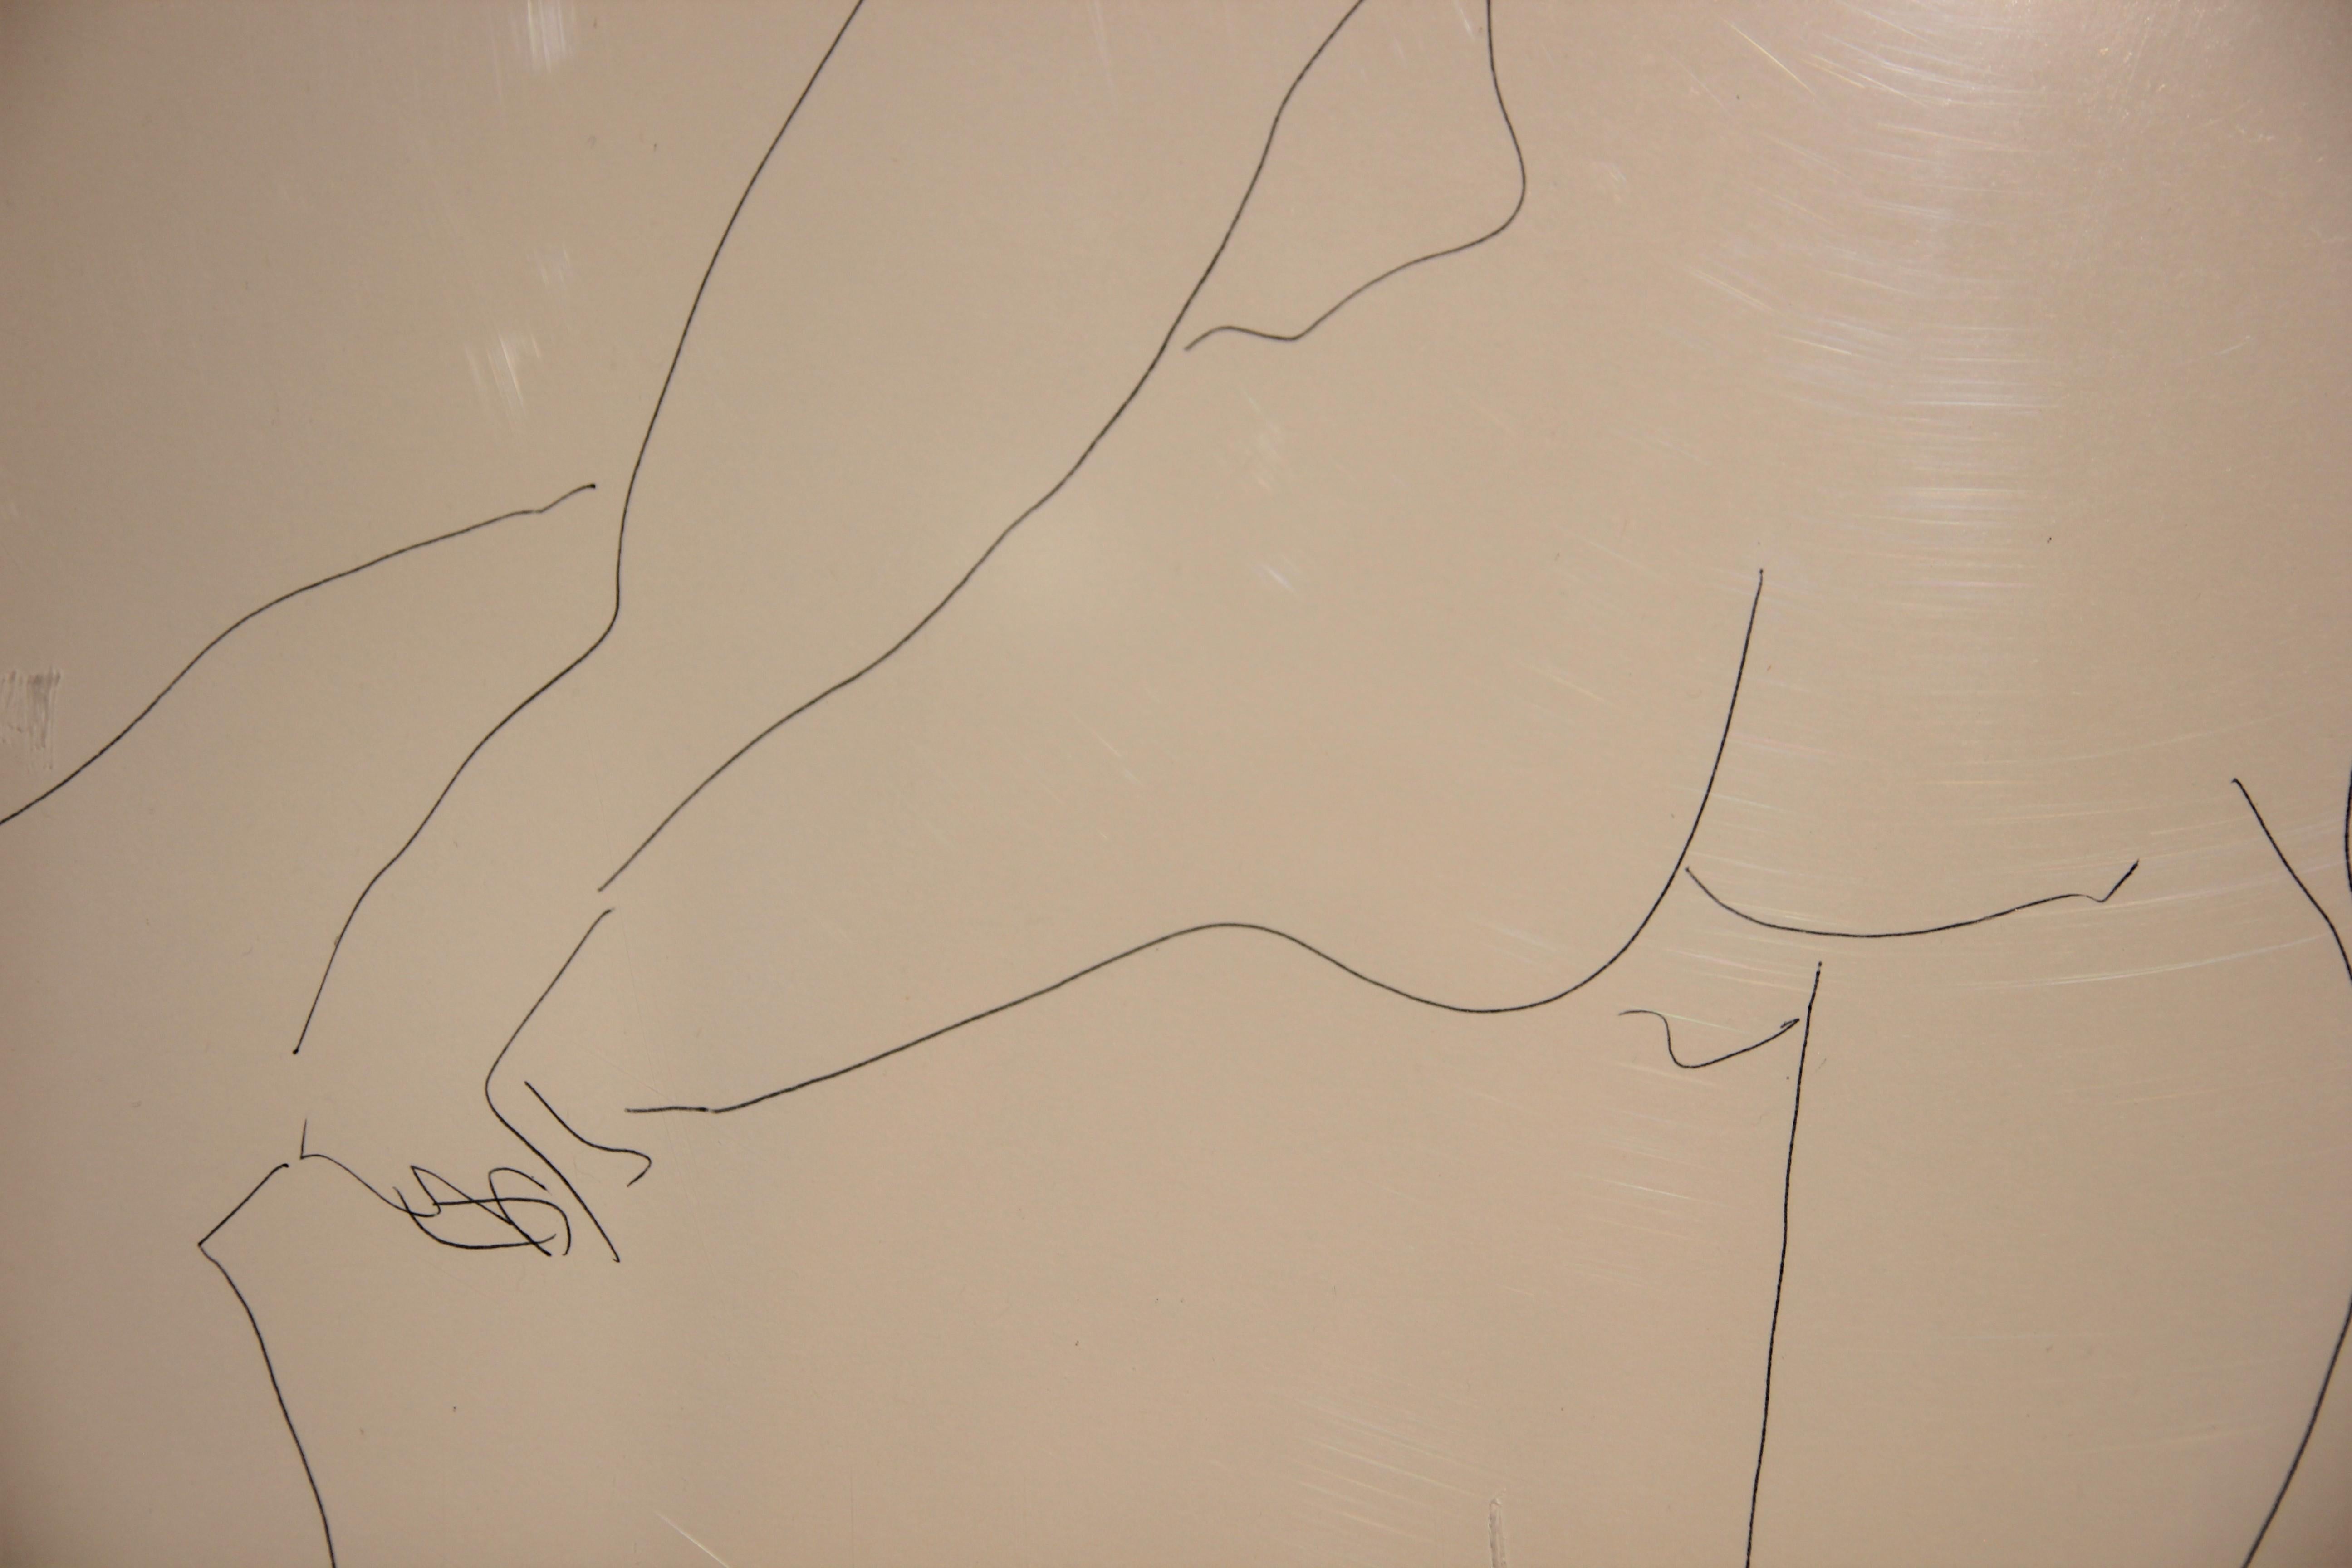 Abstract Pen Contour Line Drawing of Male Nude Back with Raised Leg  - Beige Figurative Art by Gertrude Barnstone